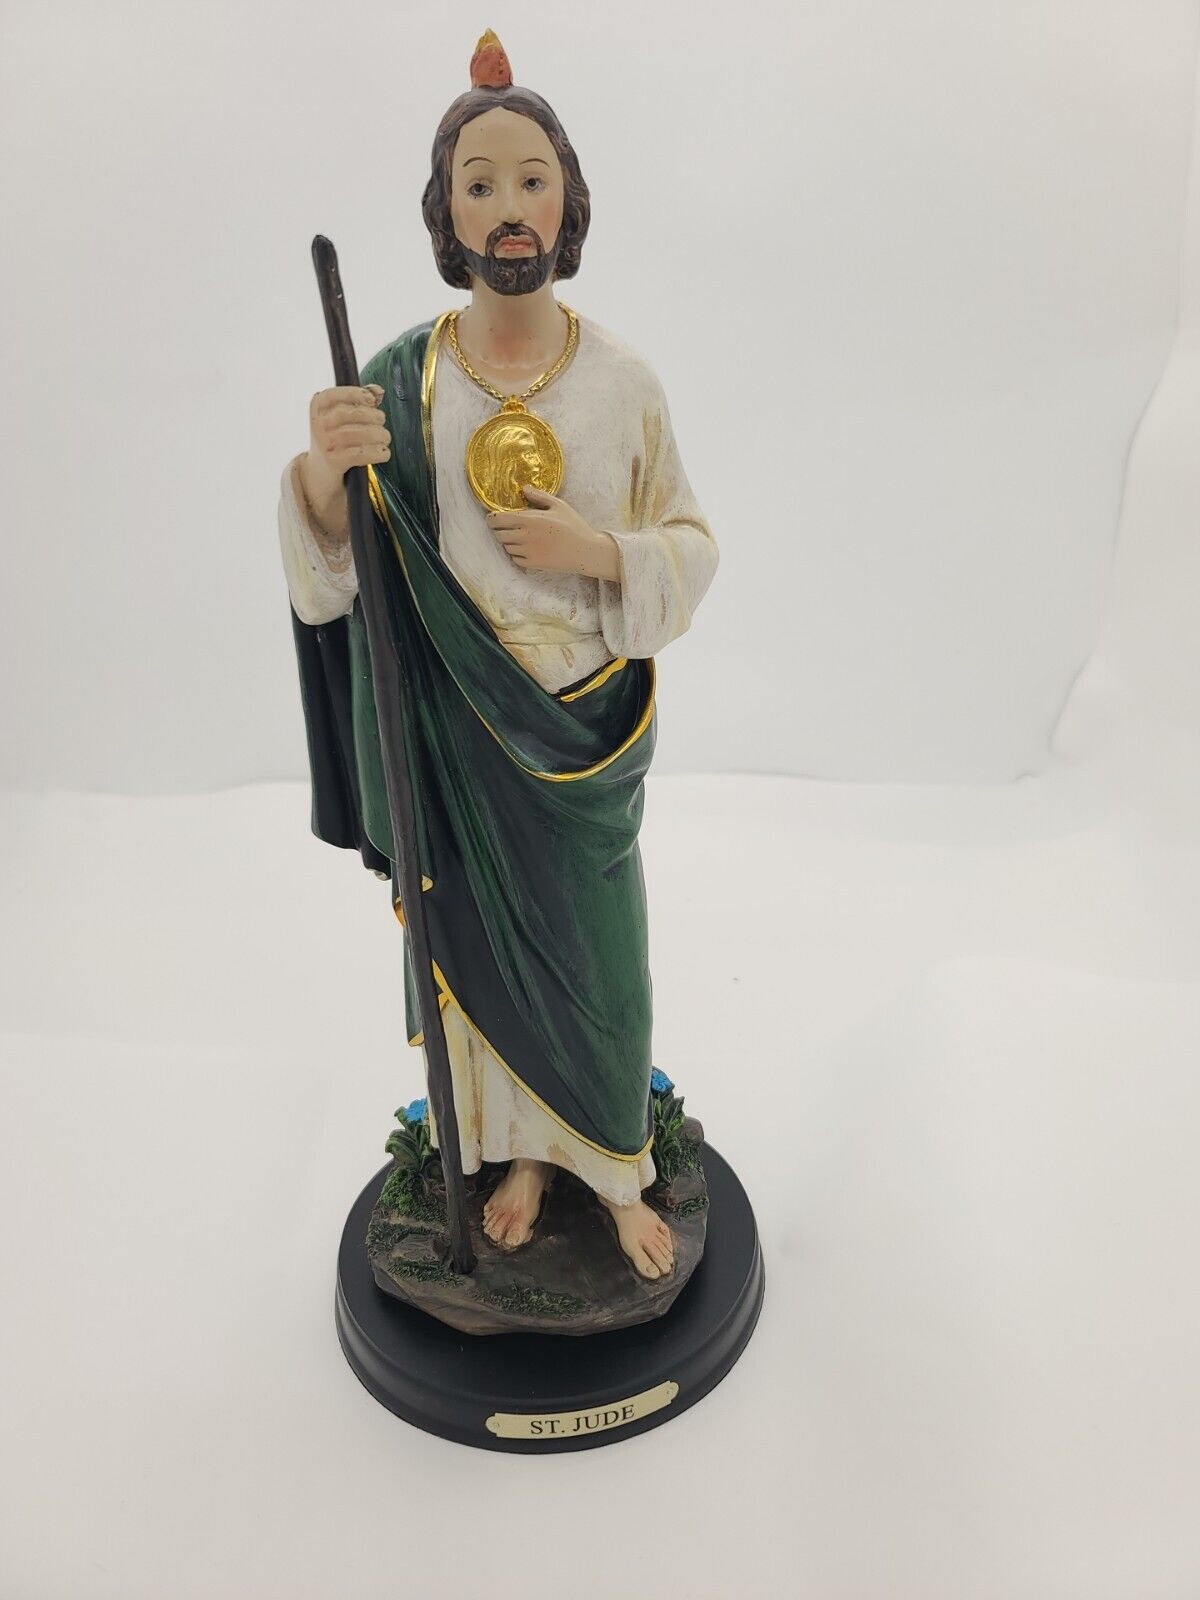 George S. Chen Imports 12-Inch Saint Jude Holy Figurine Religious Decoration 